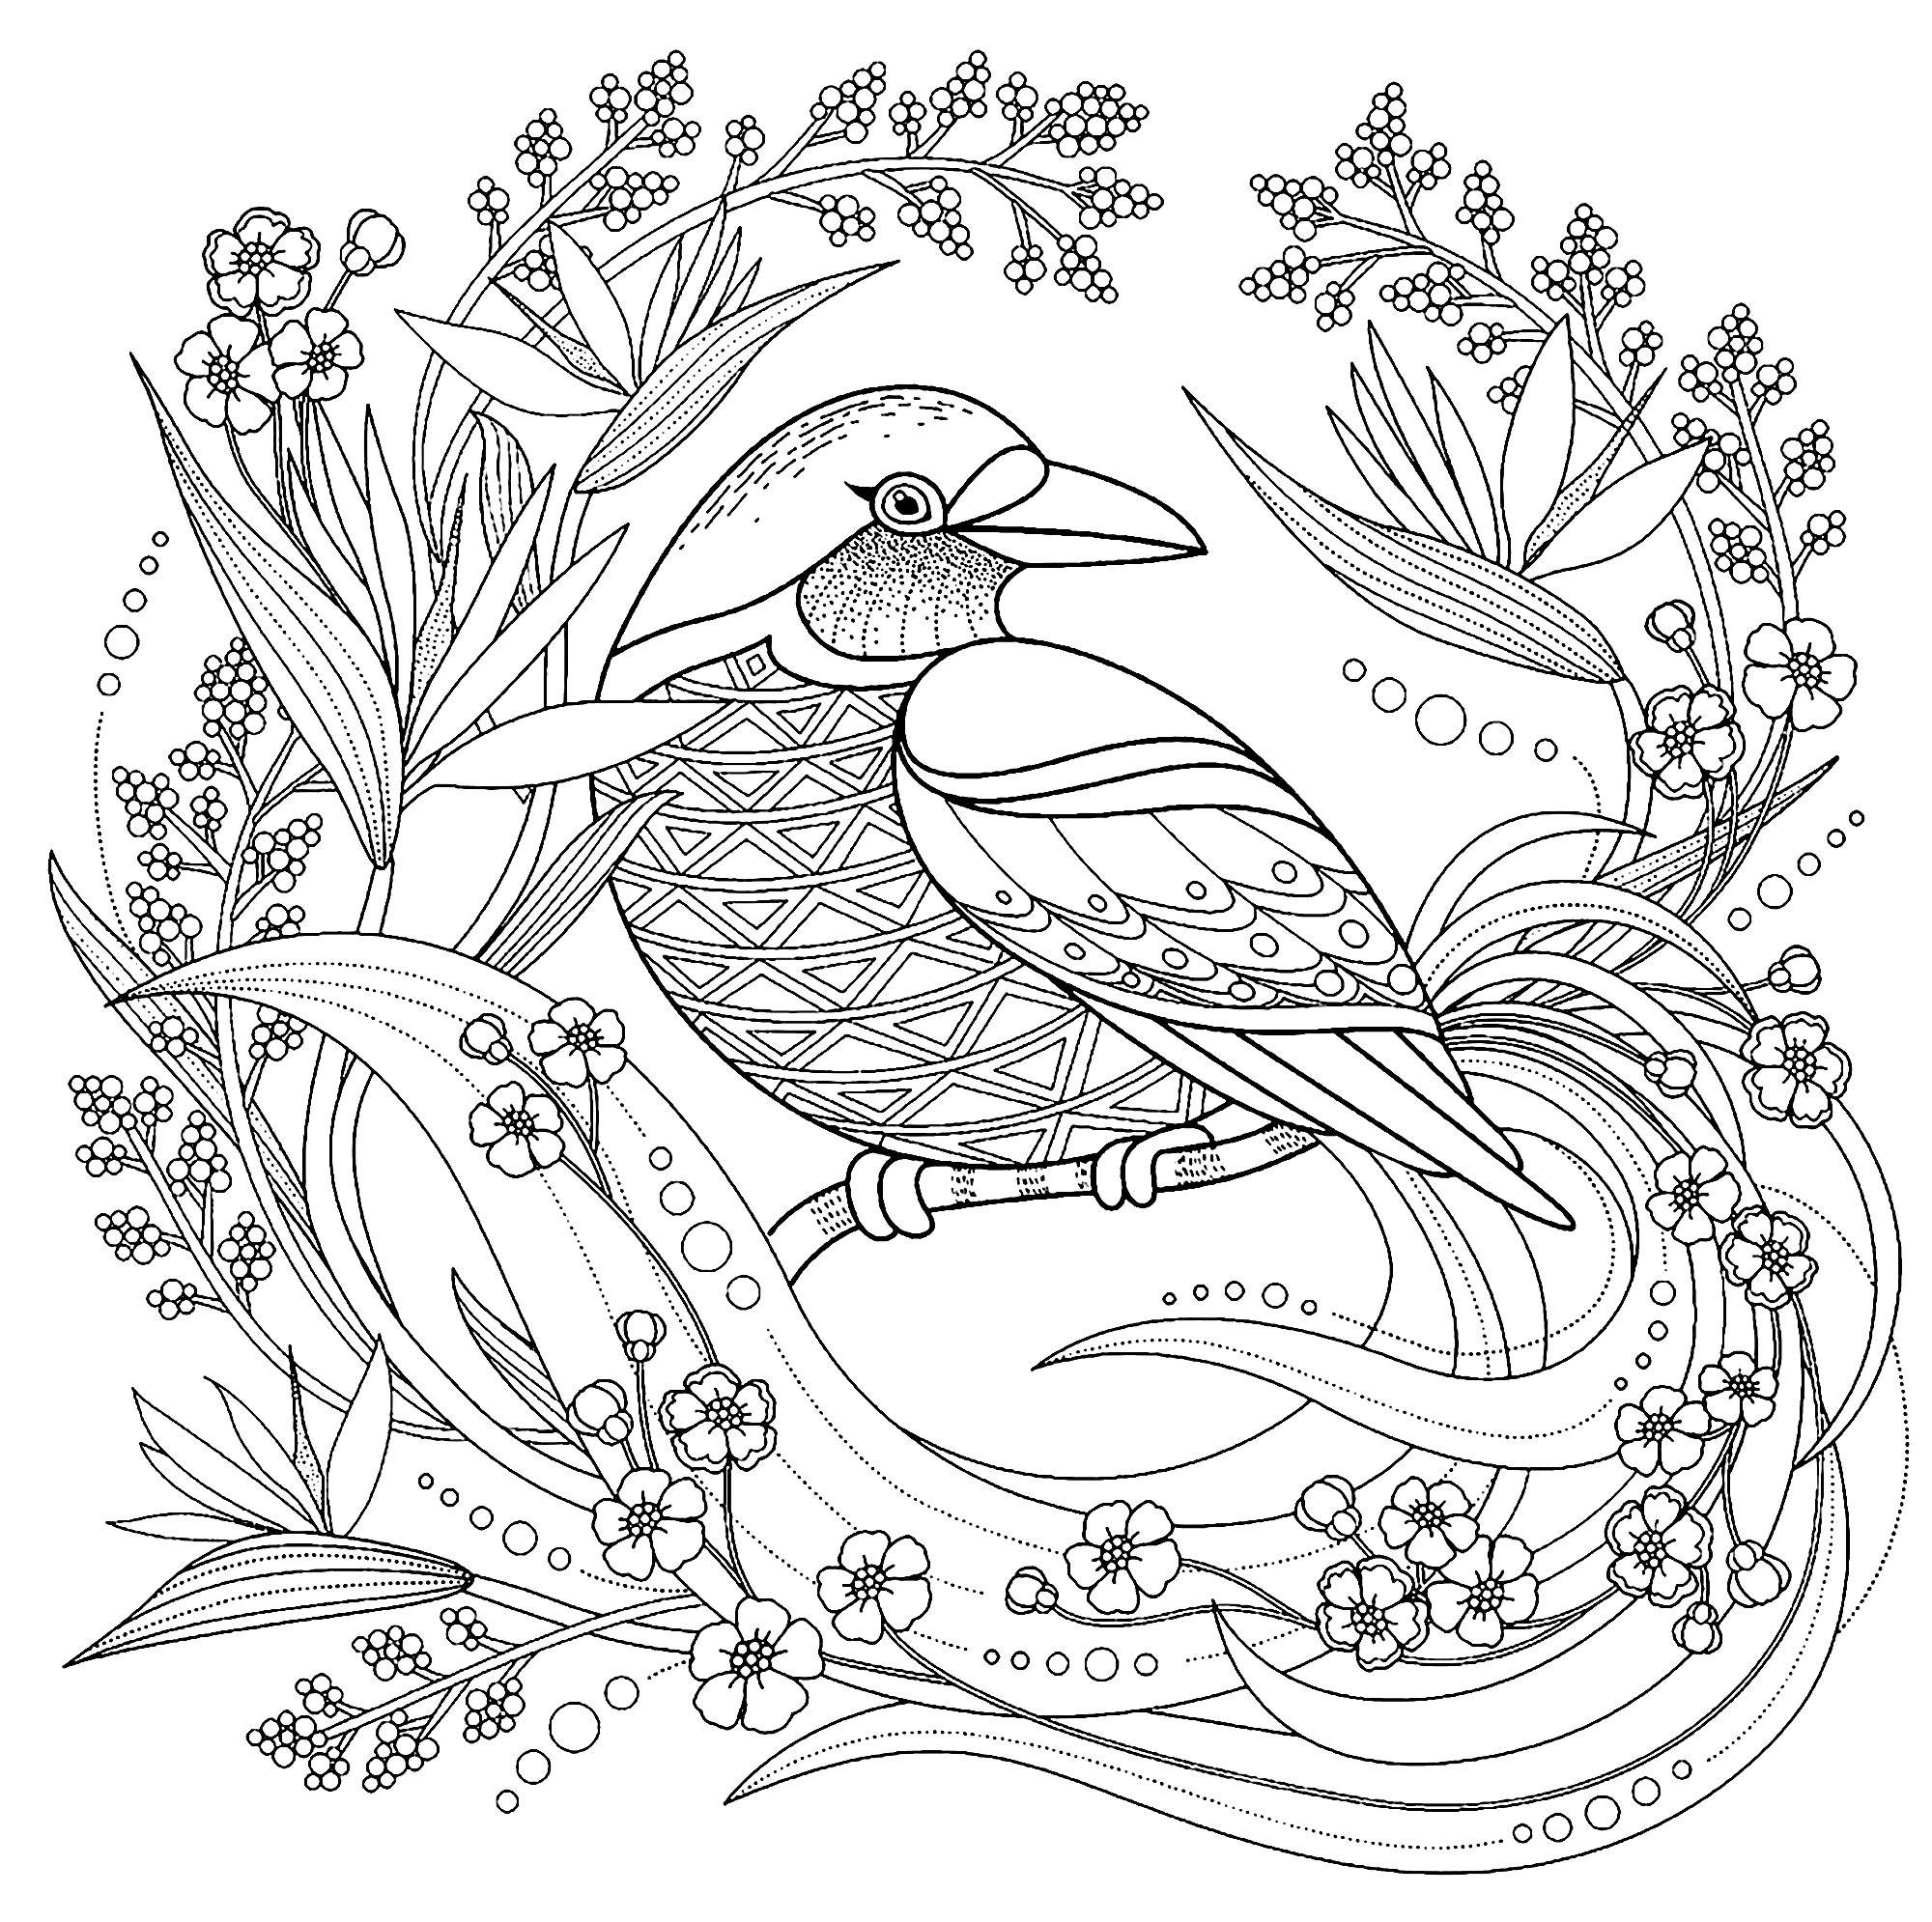 Birds free to color for children Birds Kids Coloring Pages